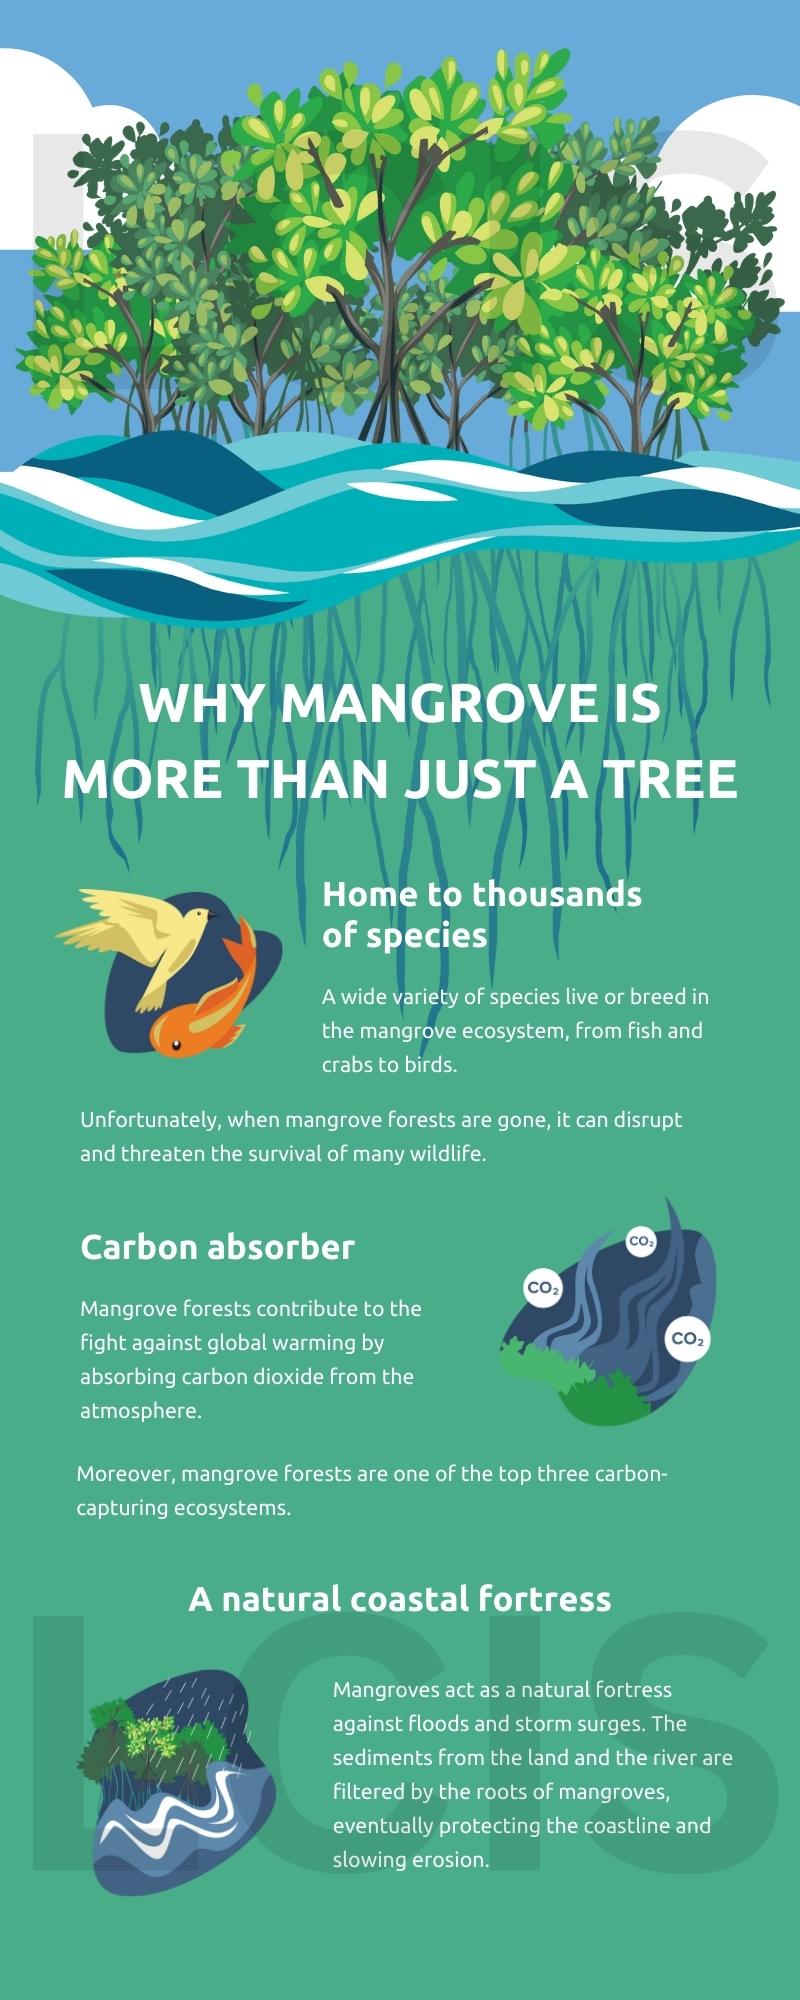 Why Mangrove is More than Just a Tree